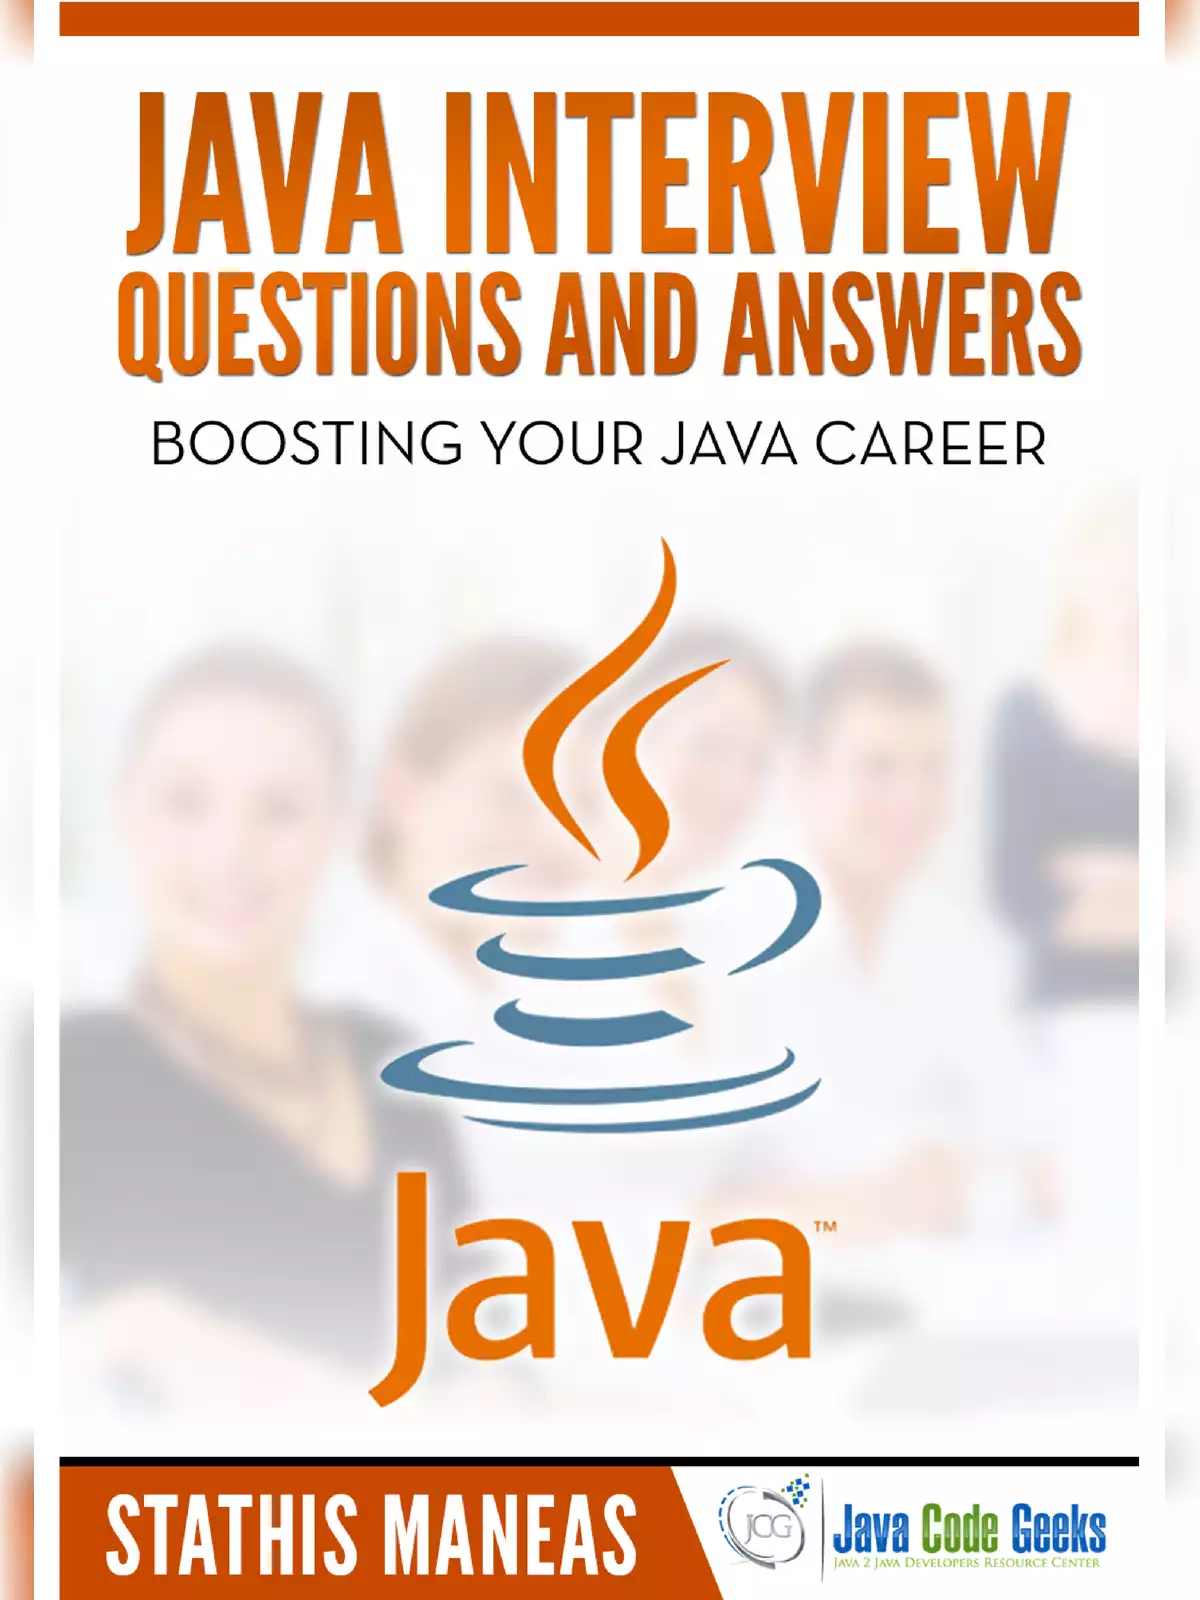 Java Interview Questions & Answers for Freshers